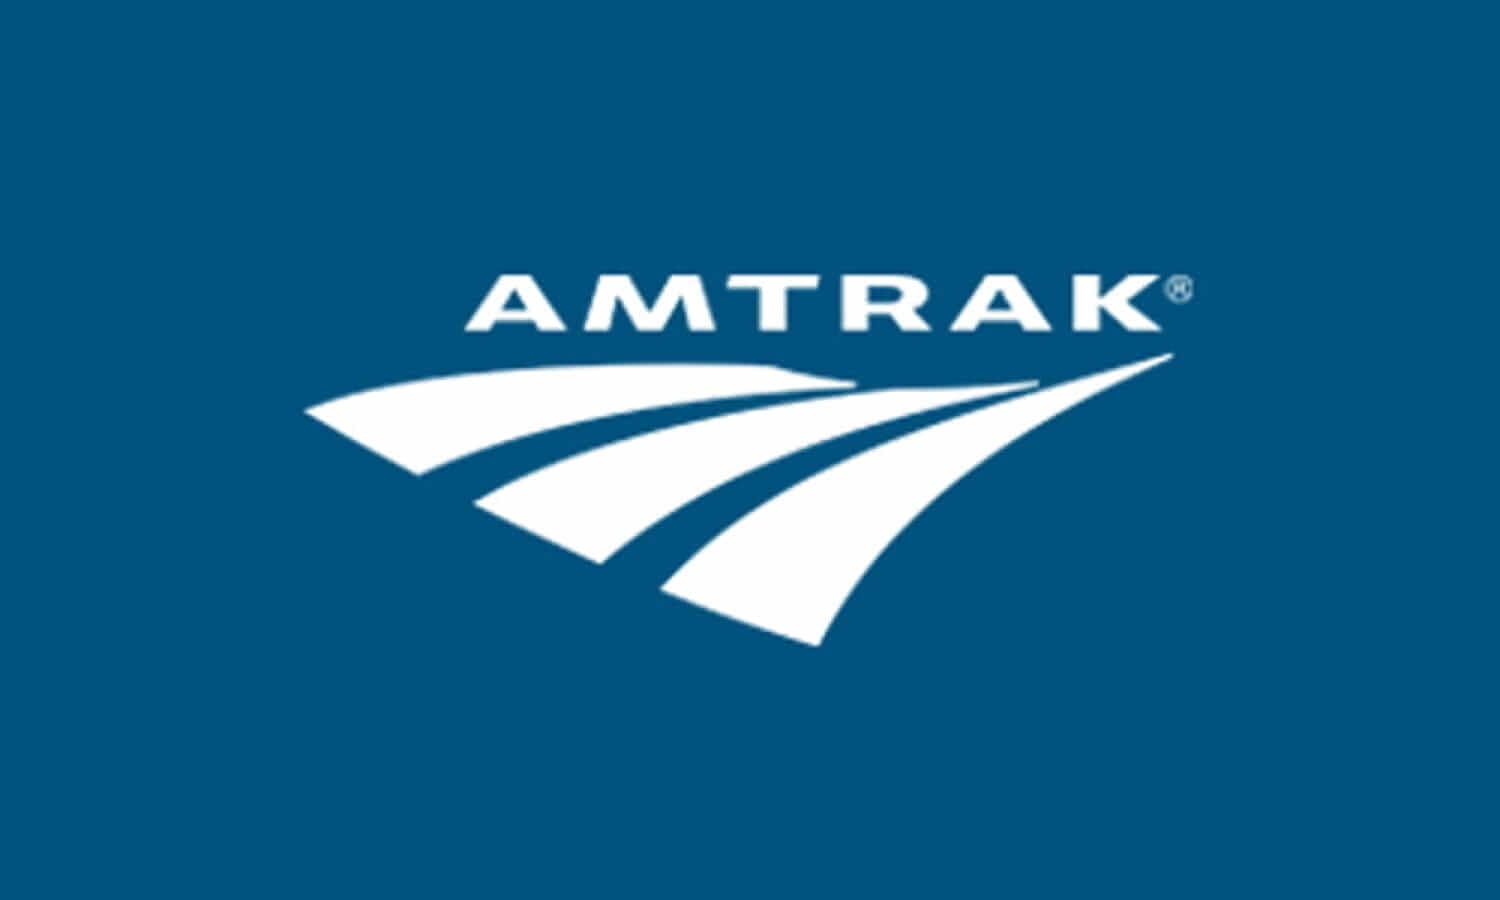 Give Amtrak Gift Cards to friends and family